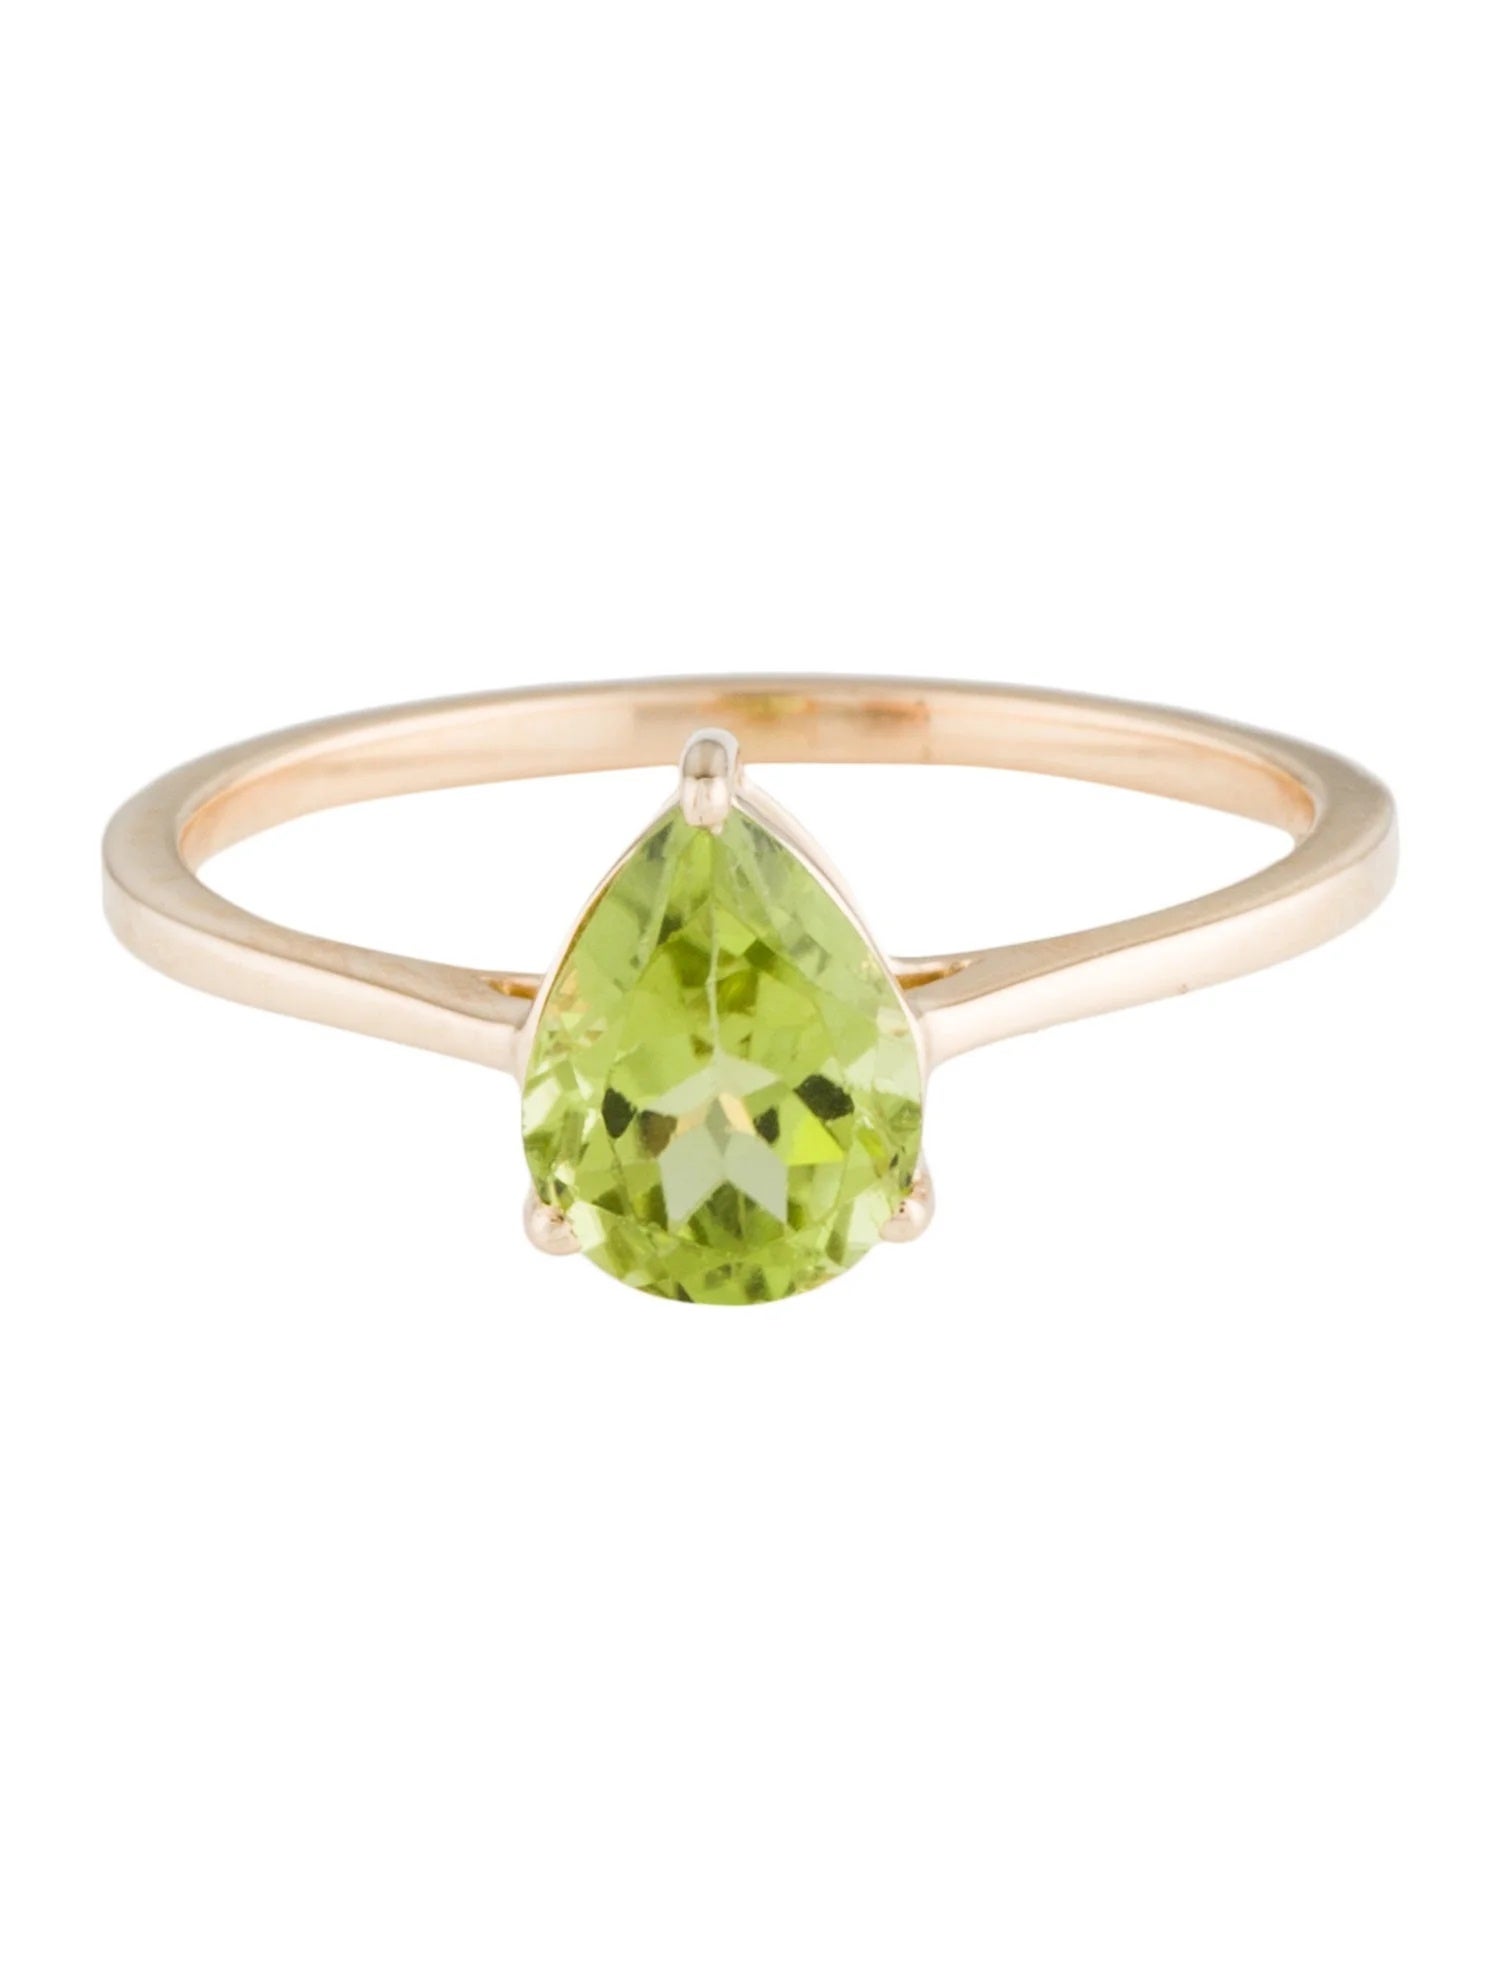 14K Yellow Gold Peridot Cocktail Ring - Pear Modified Brilliant Design For Sale